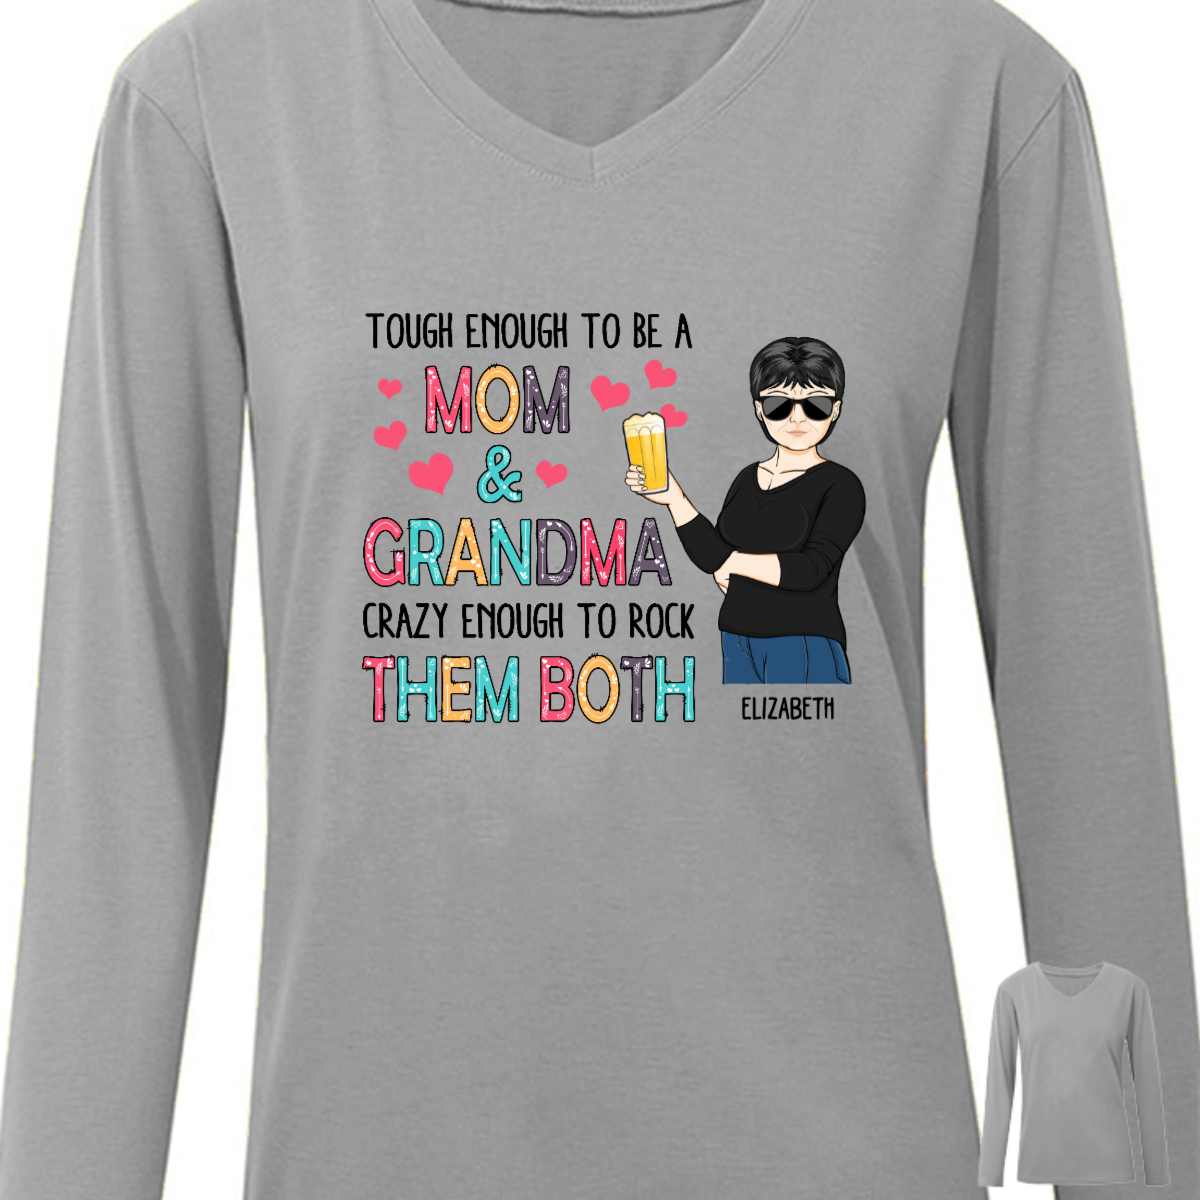 Tough Enough To Be A Mom And Grandma - Mother Gift - Personalized Custom Long Sleeve Shirt